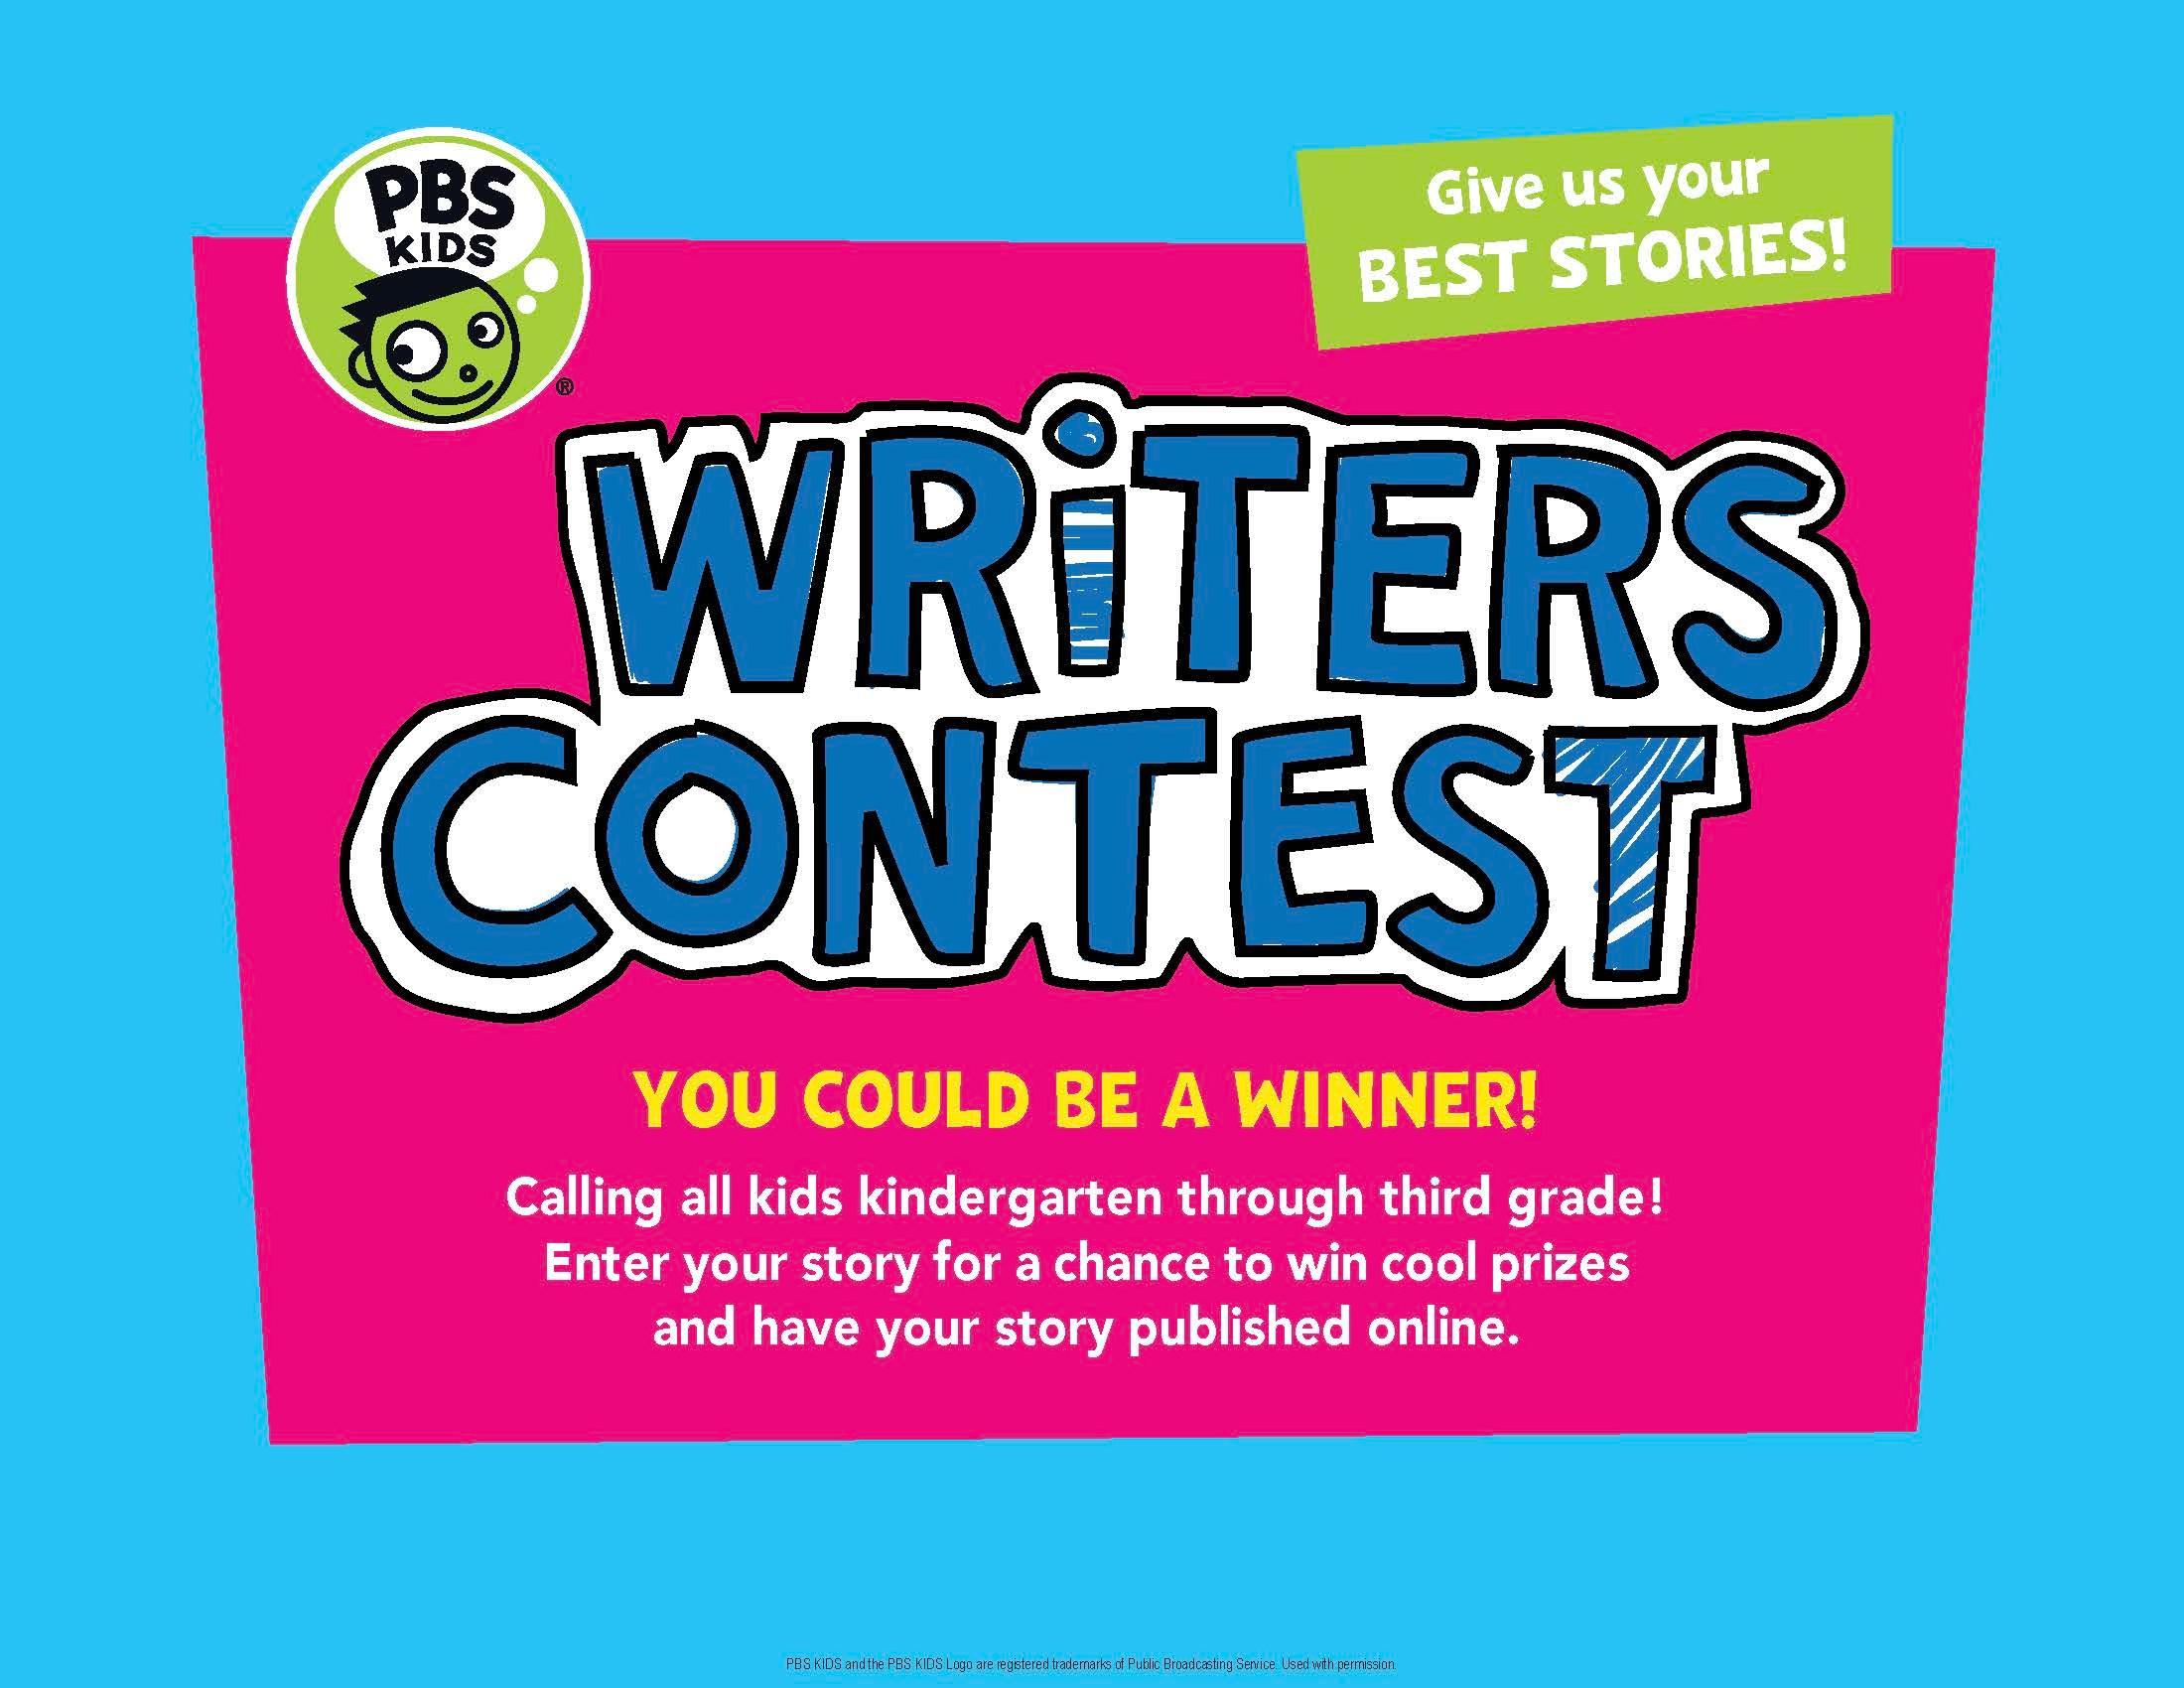 PBS KIDS Writers Contest